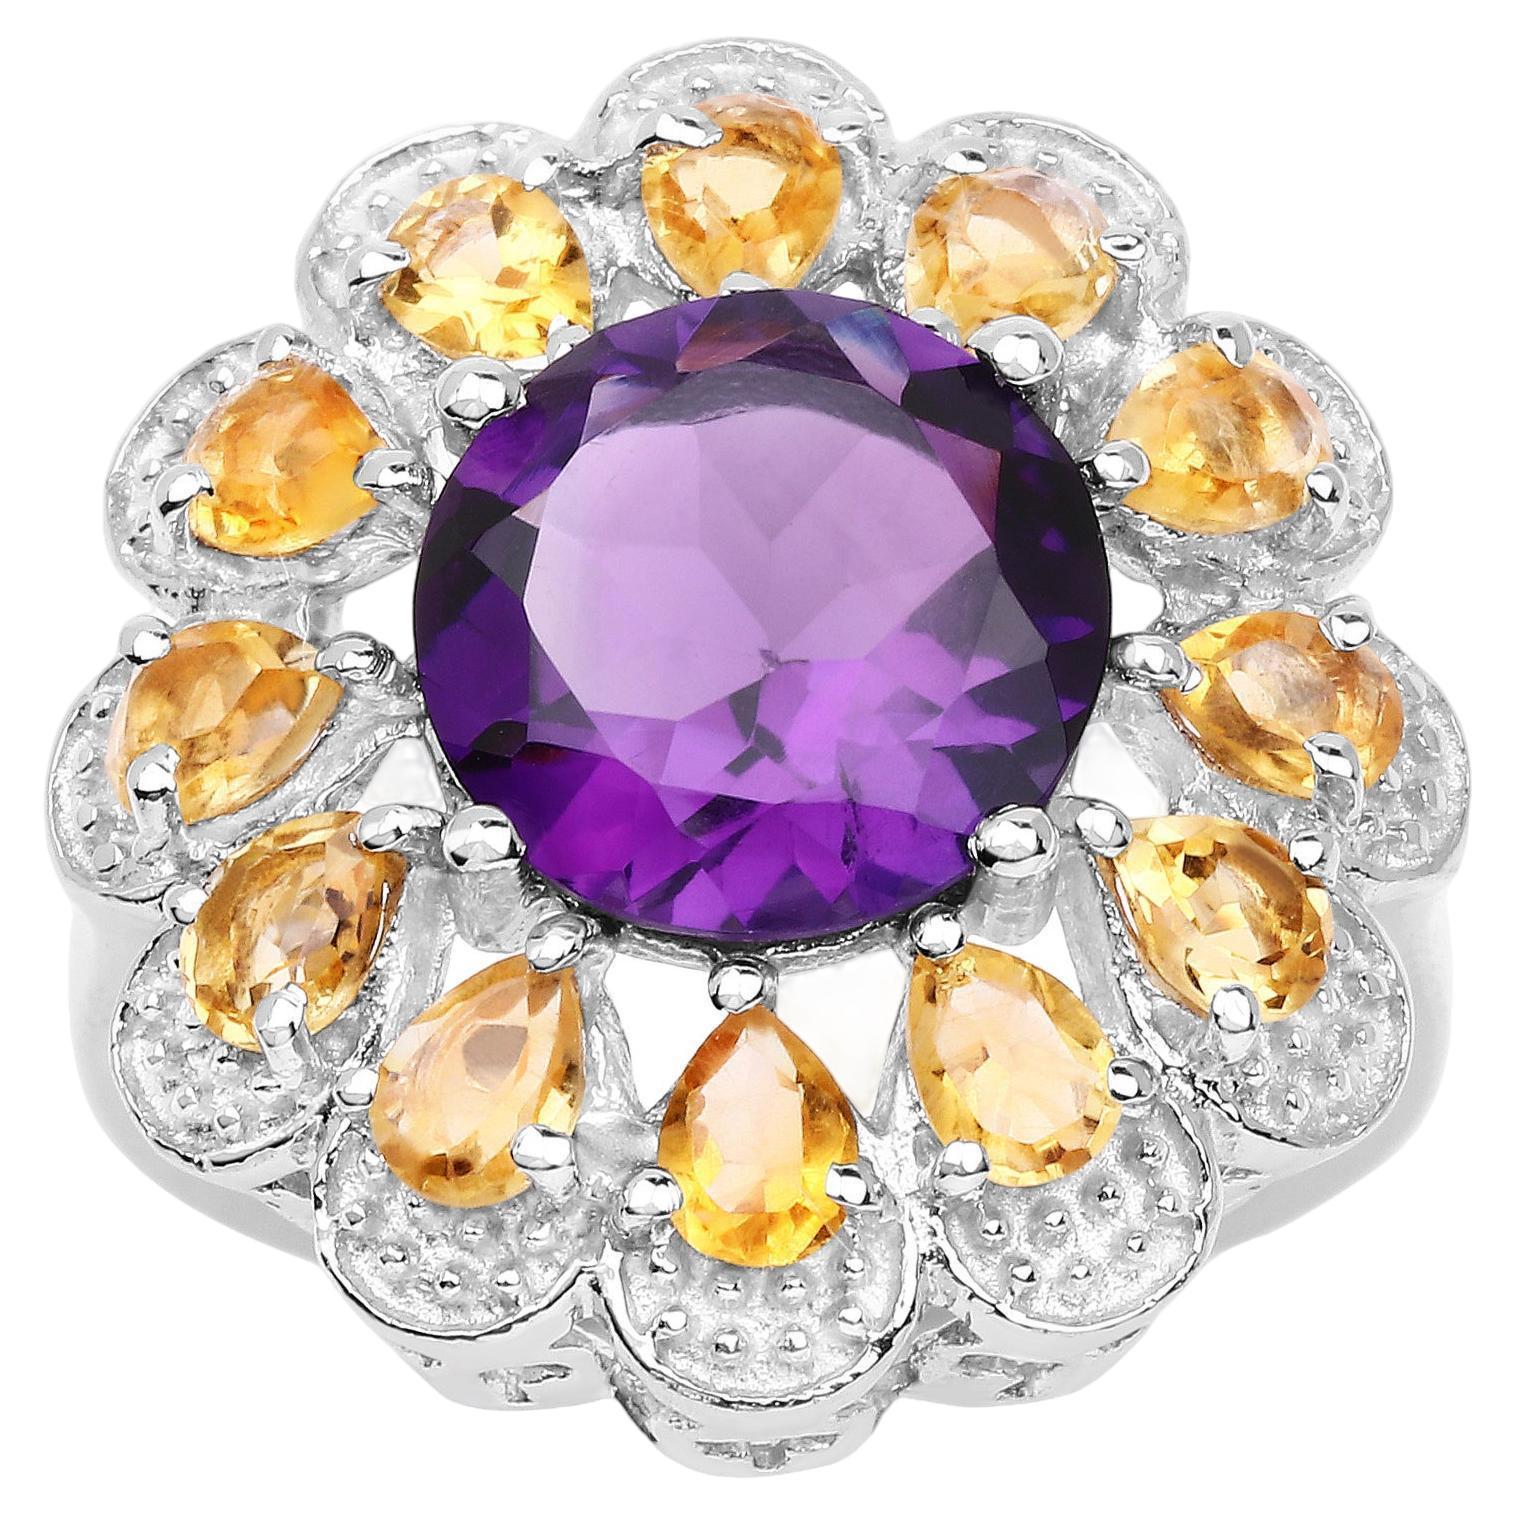 Flower 5.40 Carat Amethyst and Citrine Sterling Silver Cocktail Ring